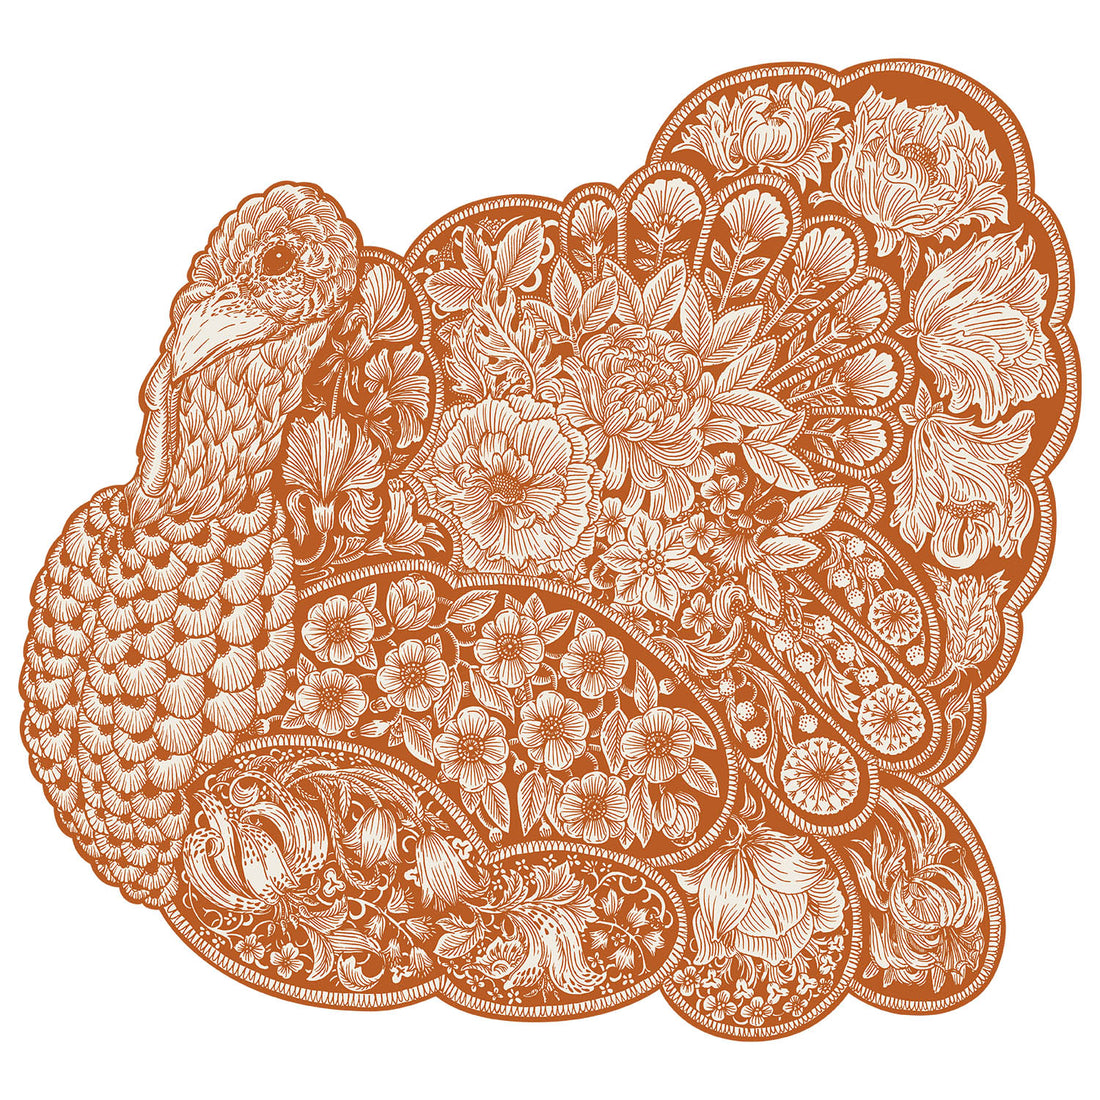 An orange and white illustration of a plump turkey, containing densely-packed floral designs in the body, wings and tail.